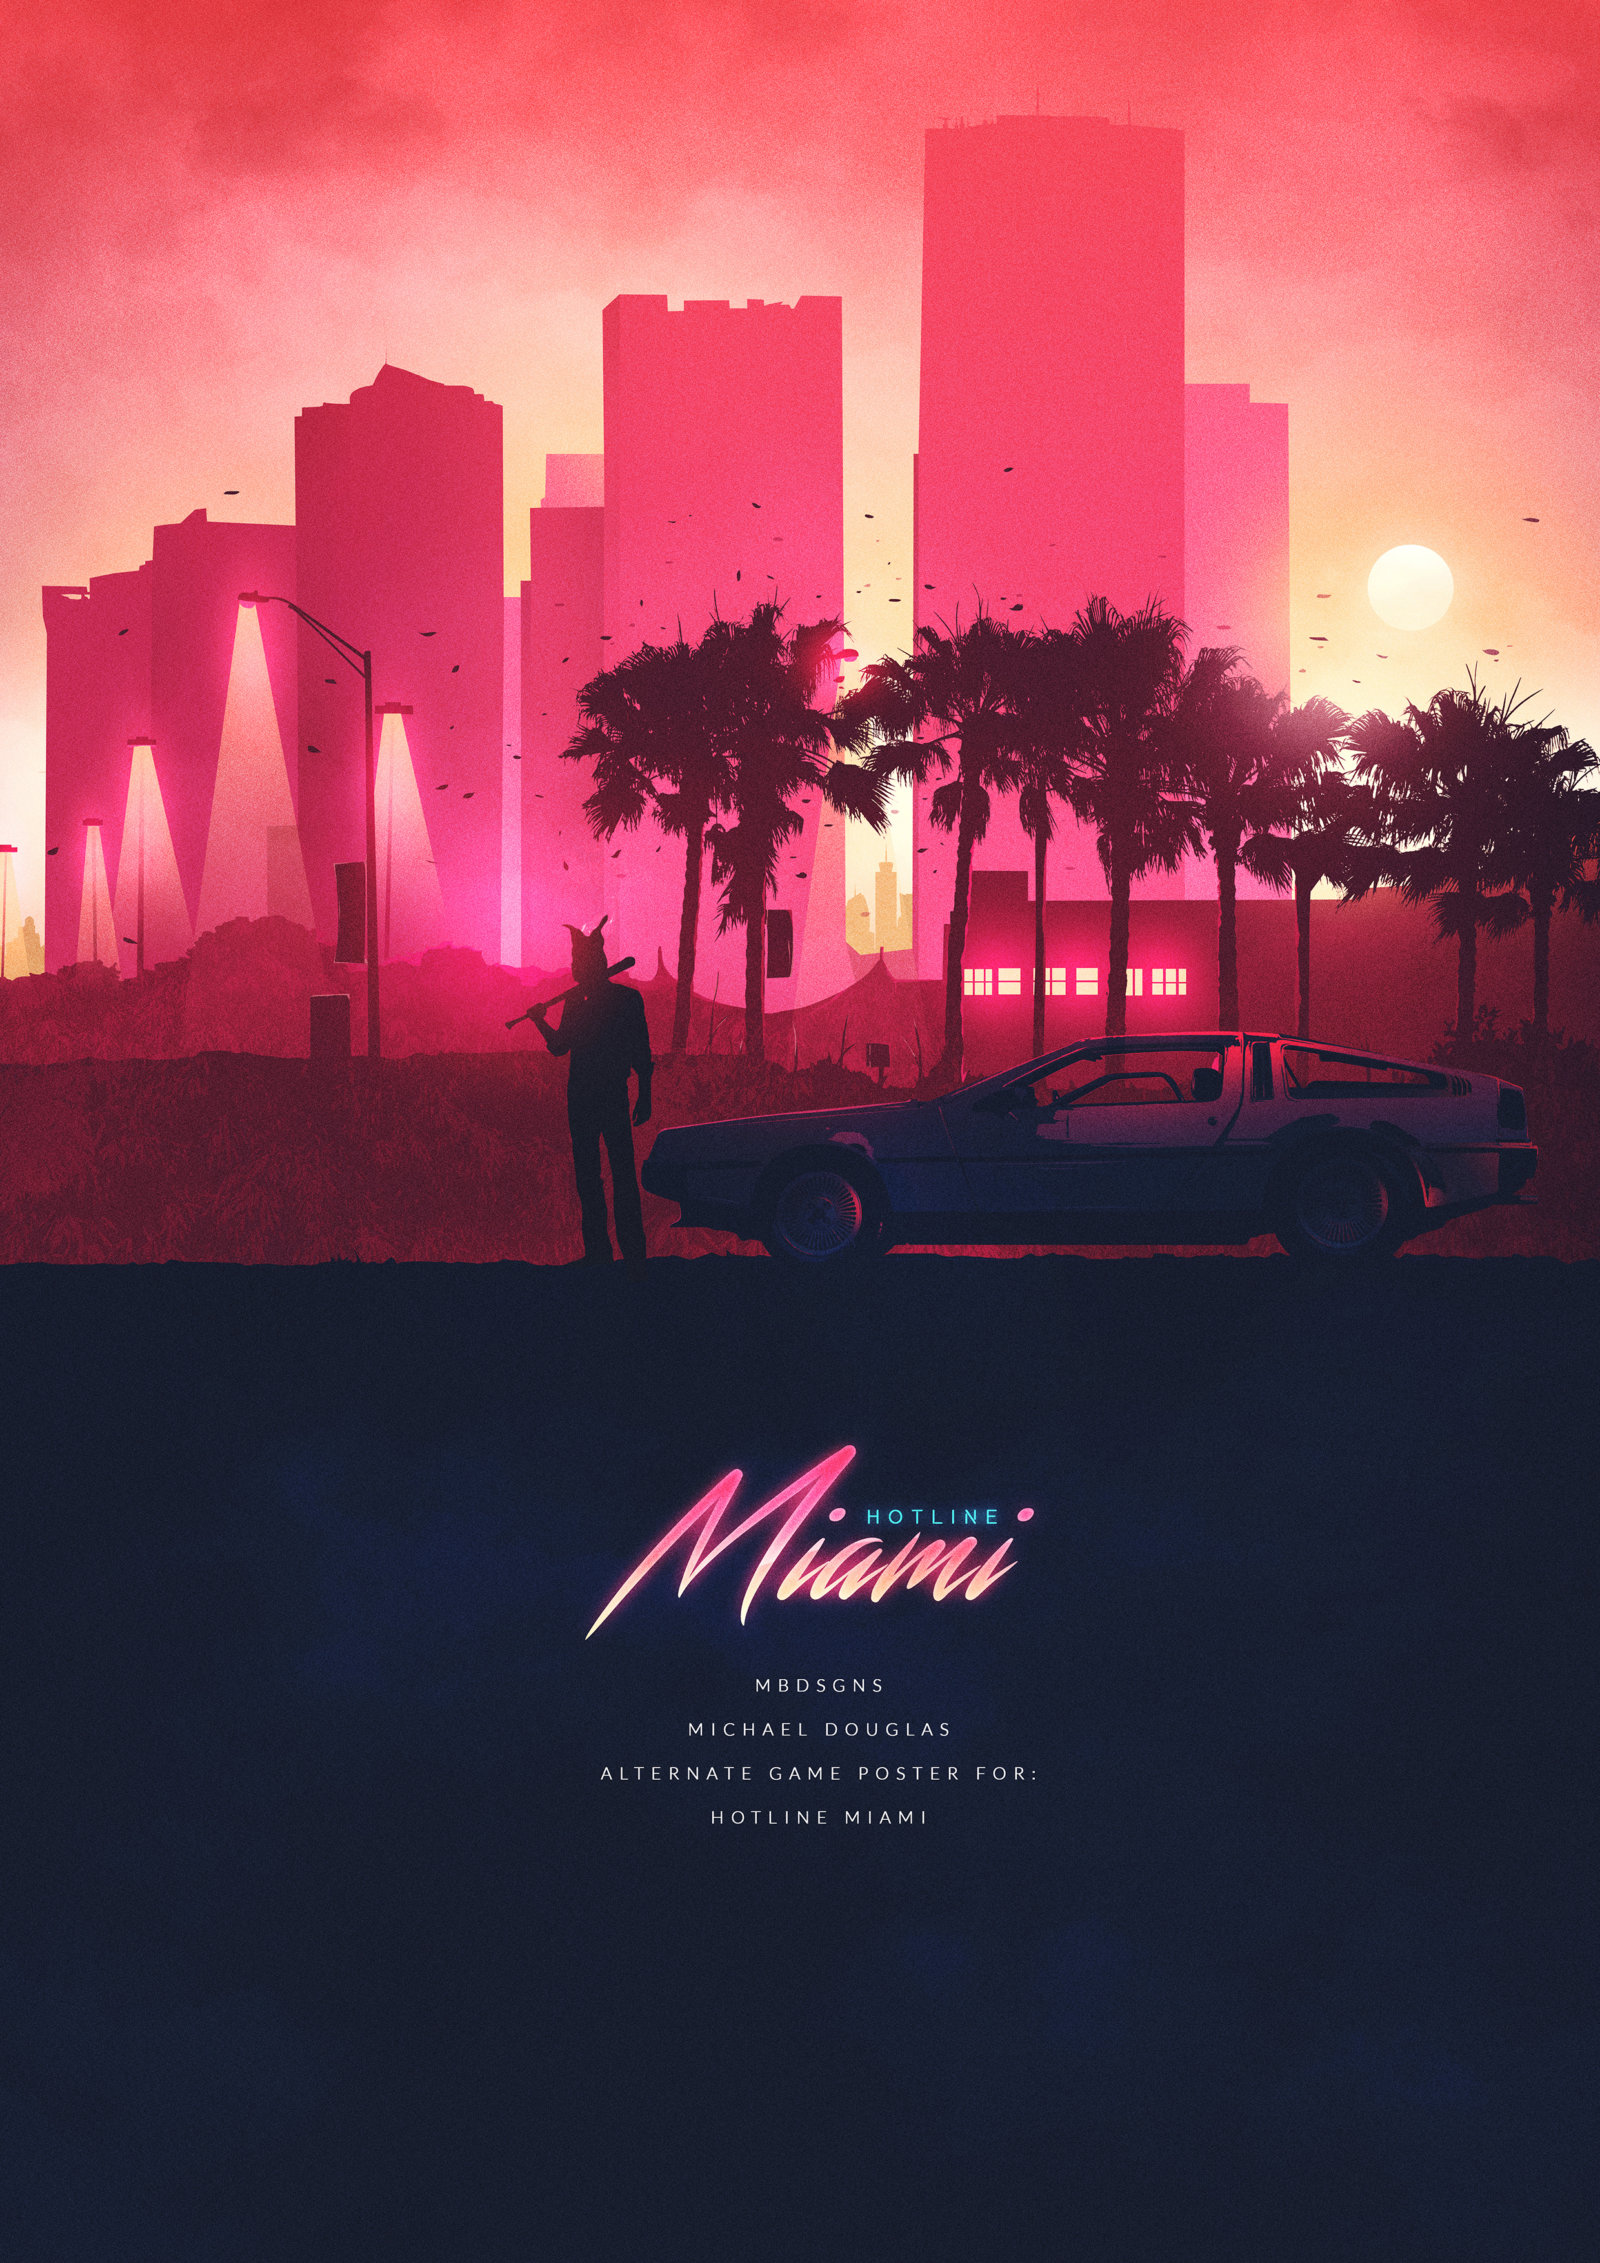 hotline-miami-poster-by-mbdsgns